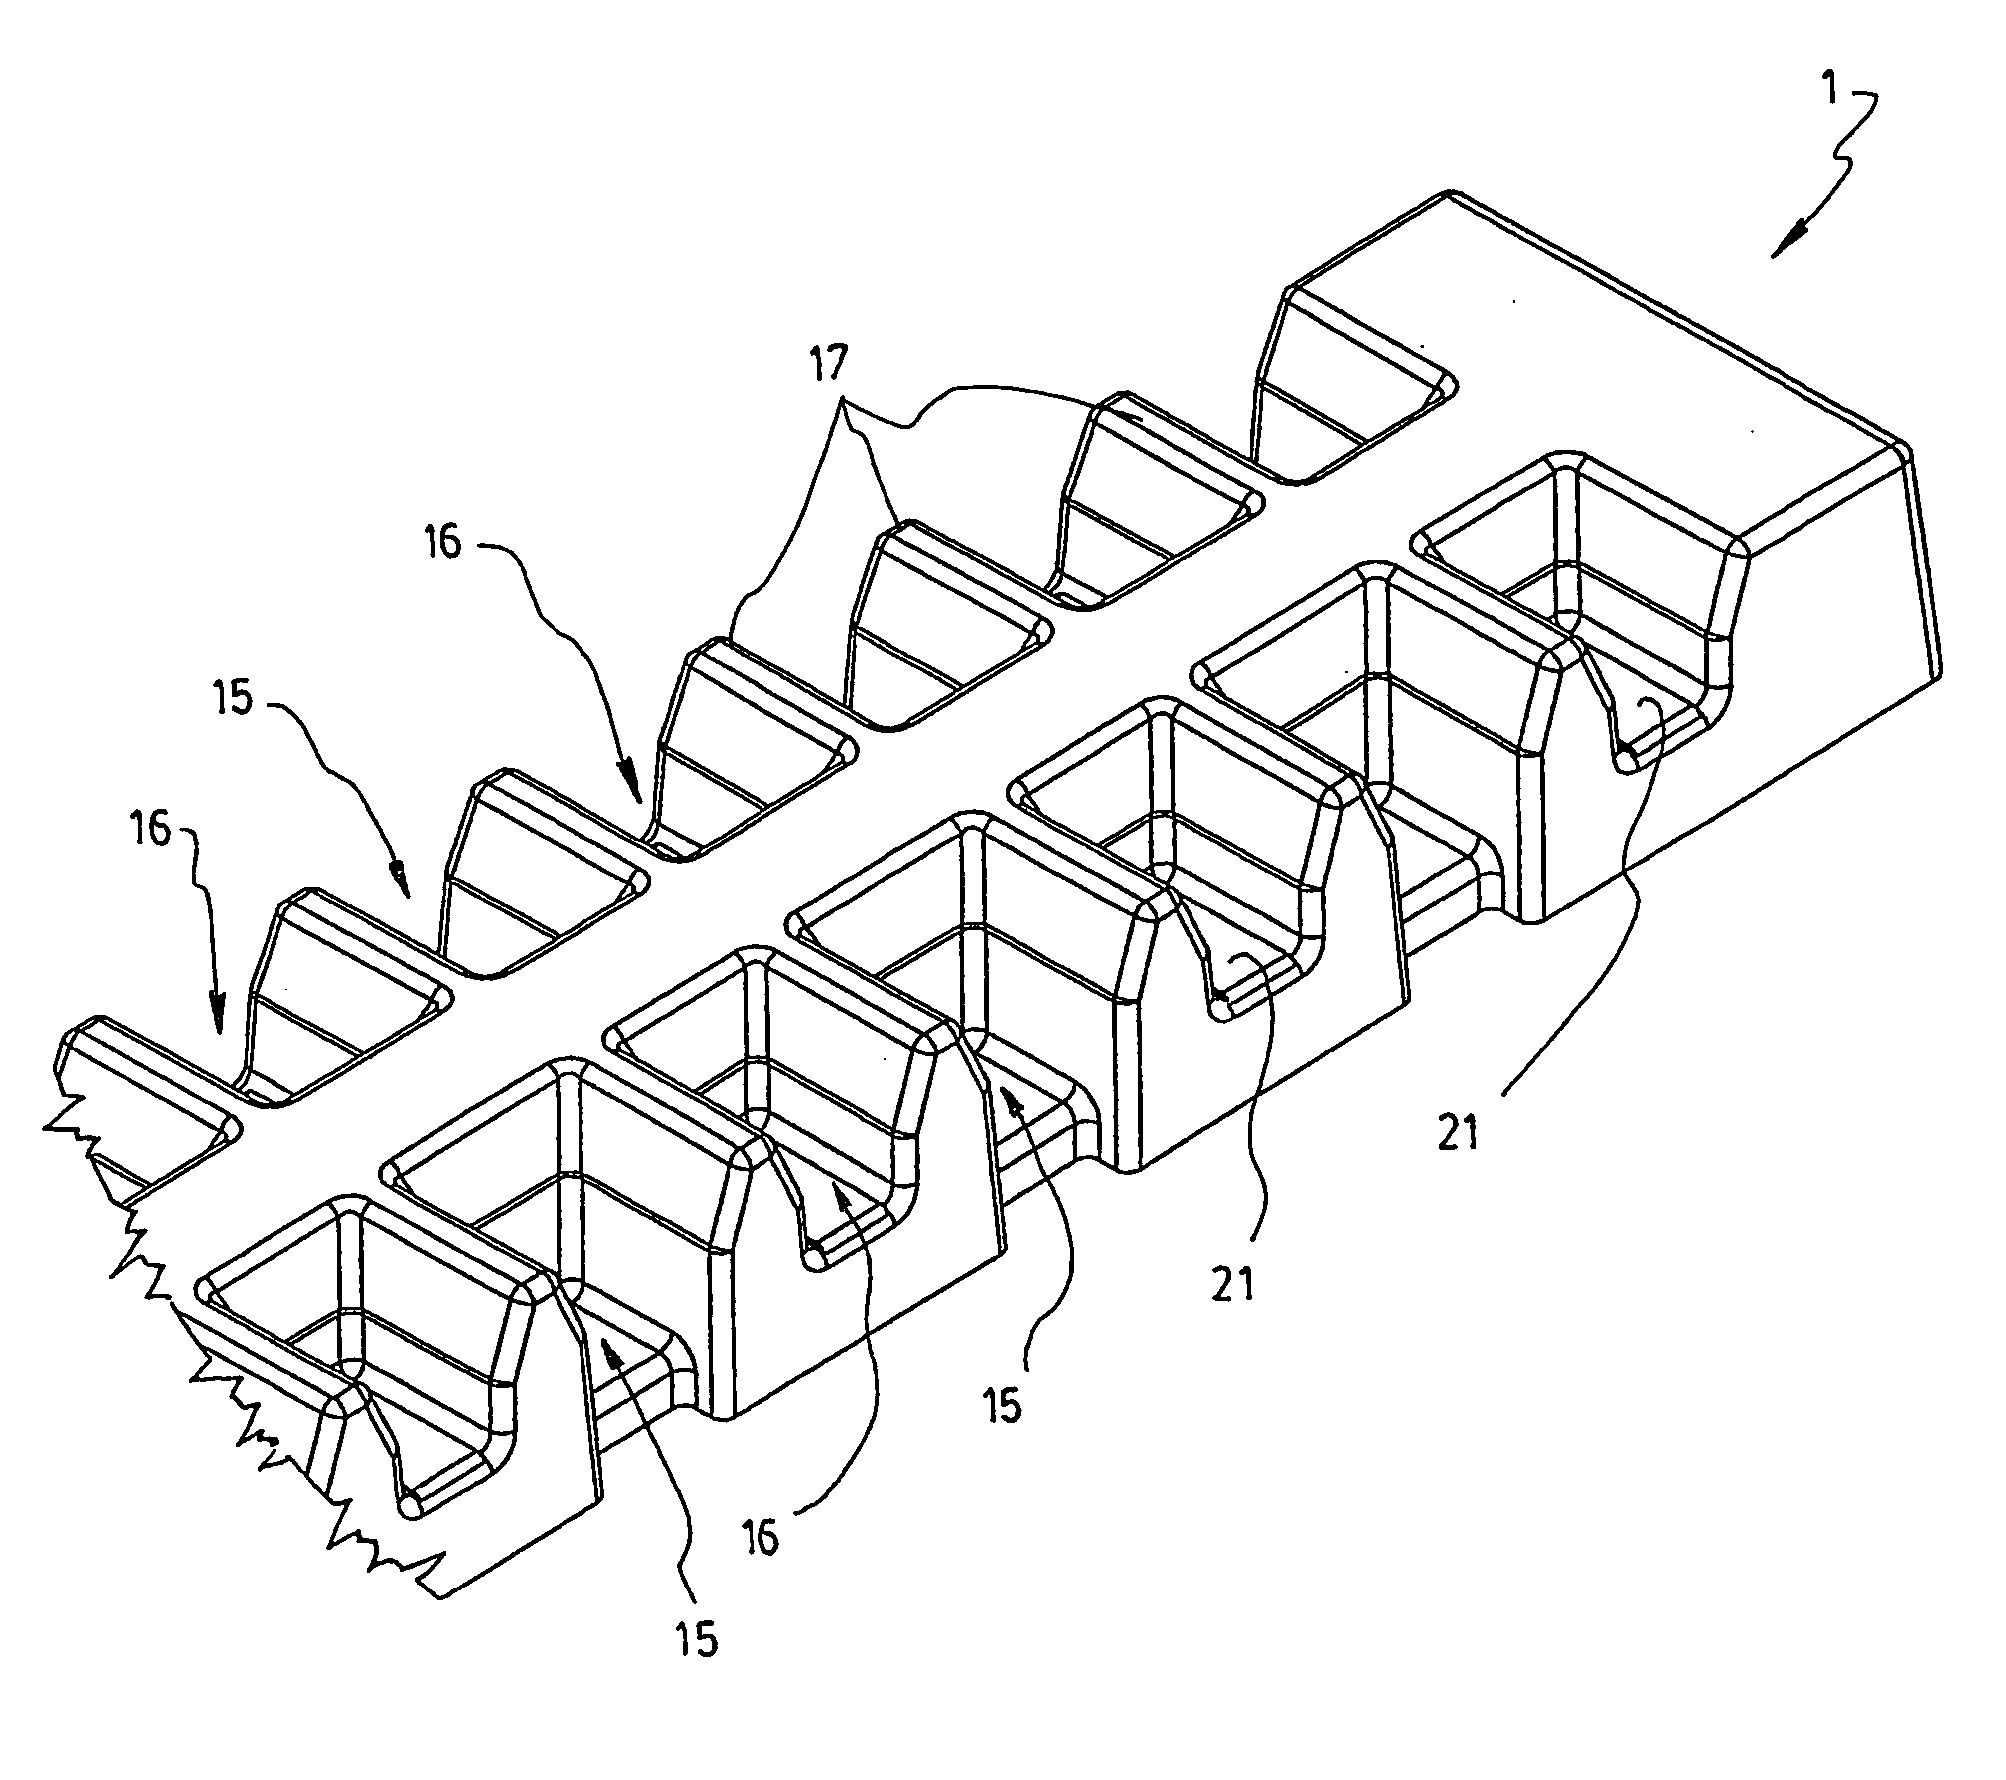 Capping board with at least one sheet of electrically conductive material embedded therein